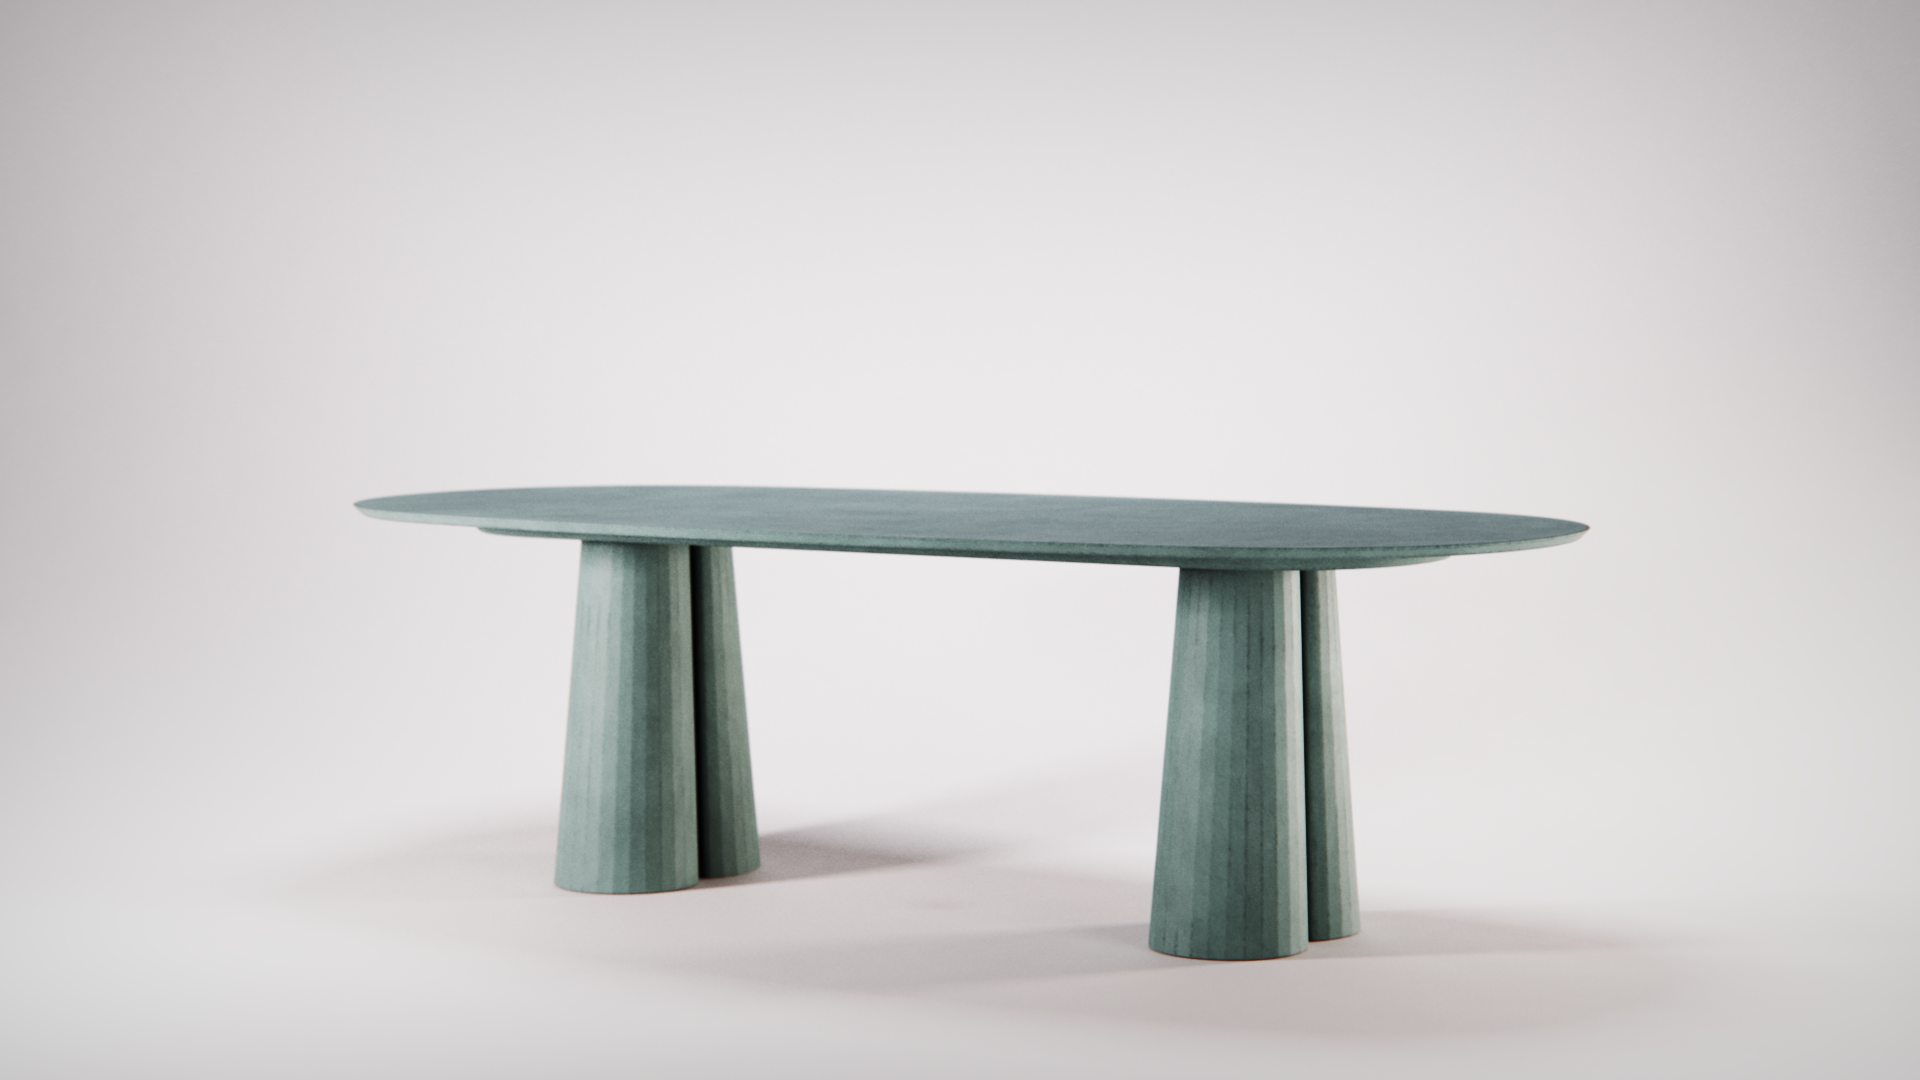 Fusto Oval Dining Table designed by Marialaura Rossiello Studio Irvine 240x120x73 Ultramarine (2).png